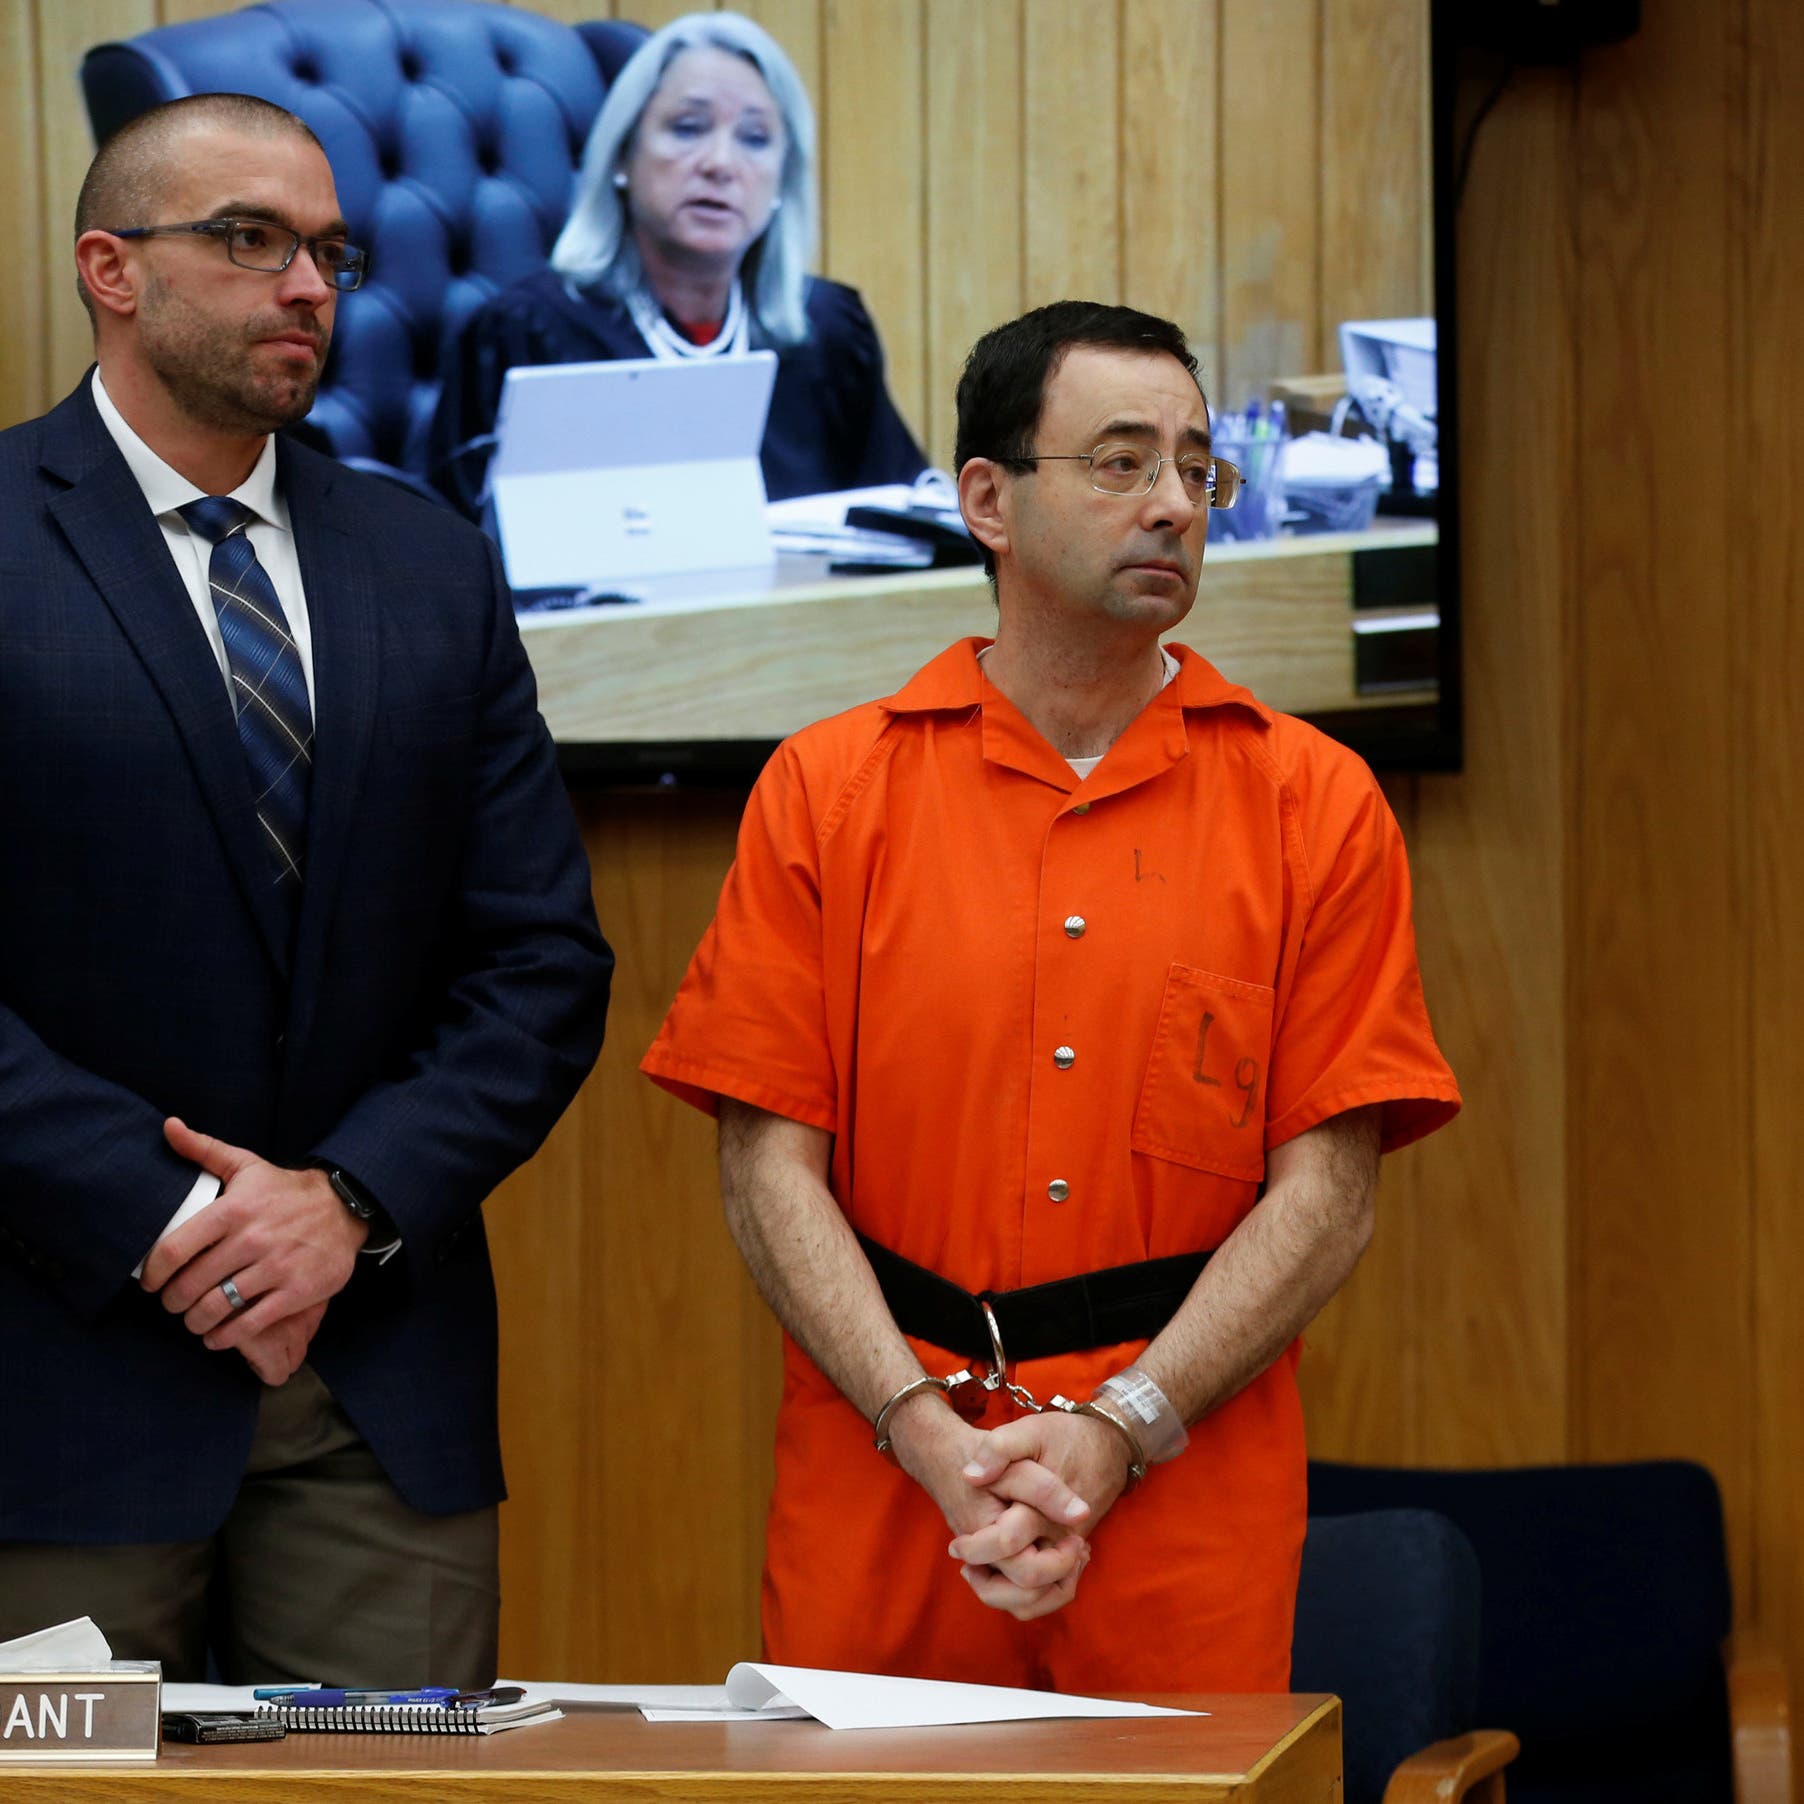 Ex-USA Gymnastics doctor gets up to 125 more years in prison for abuse